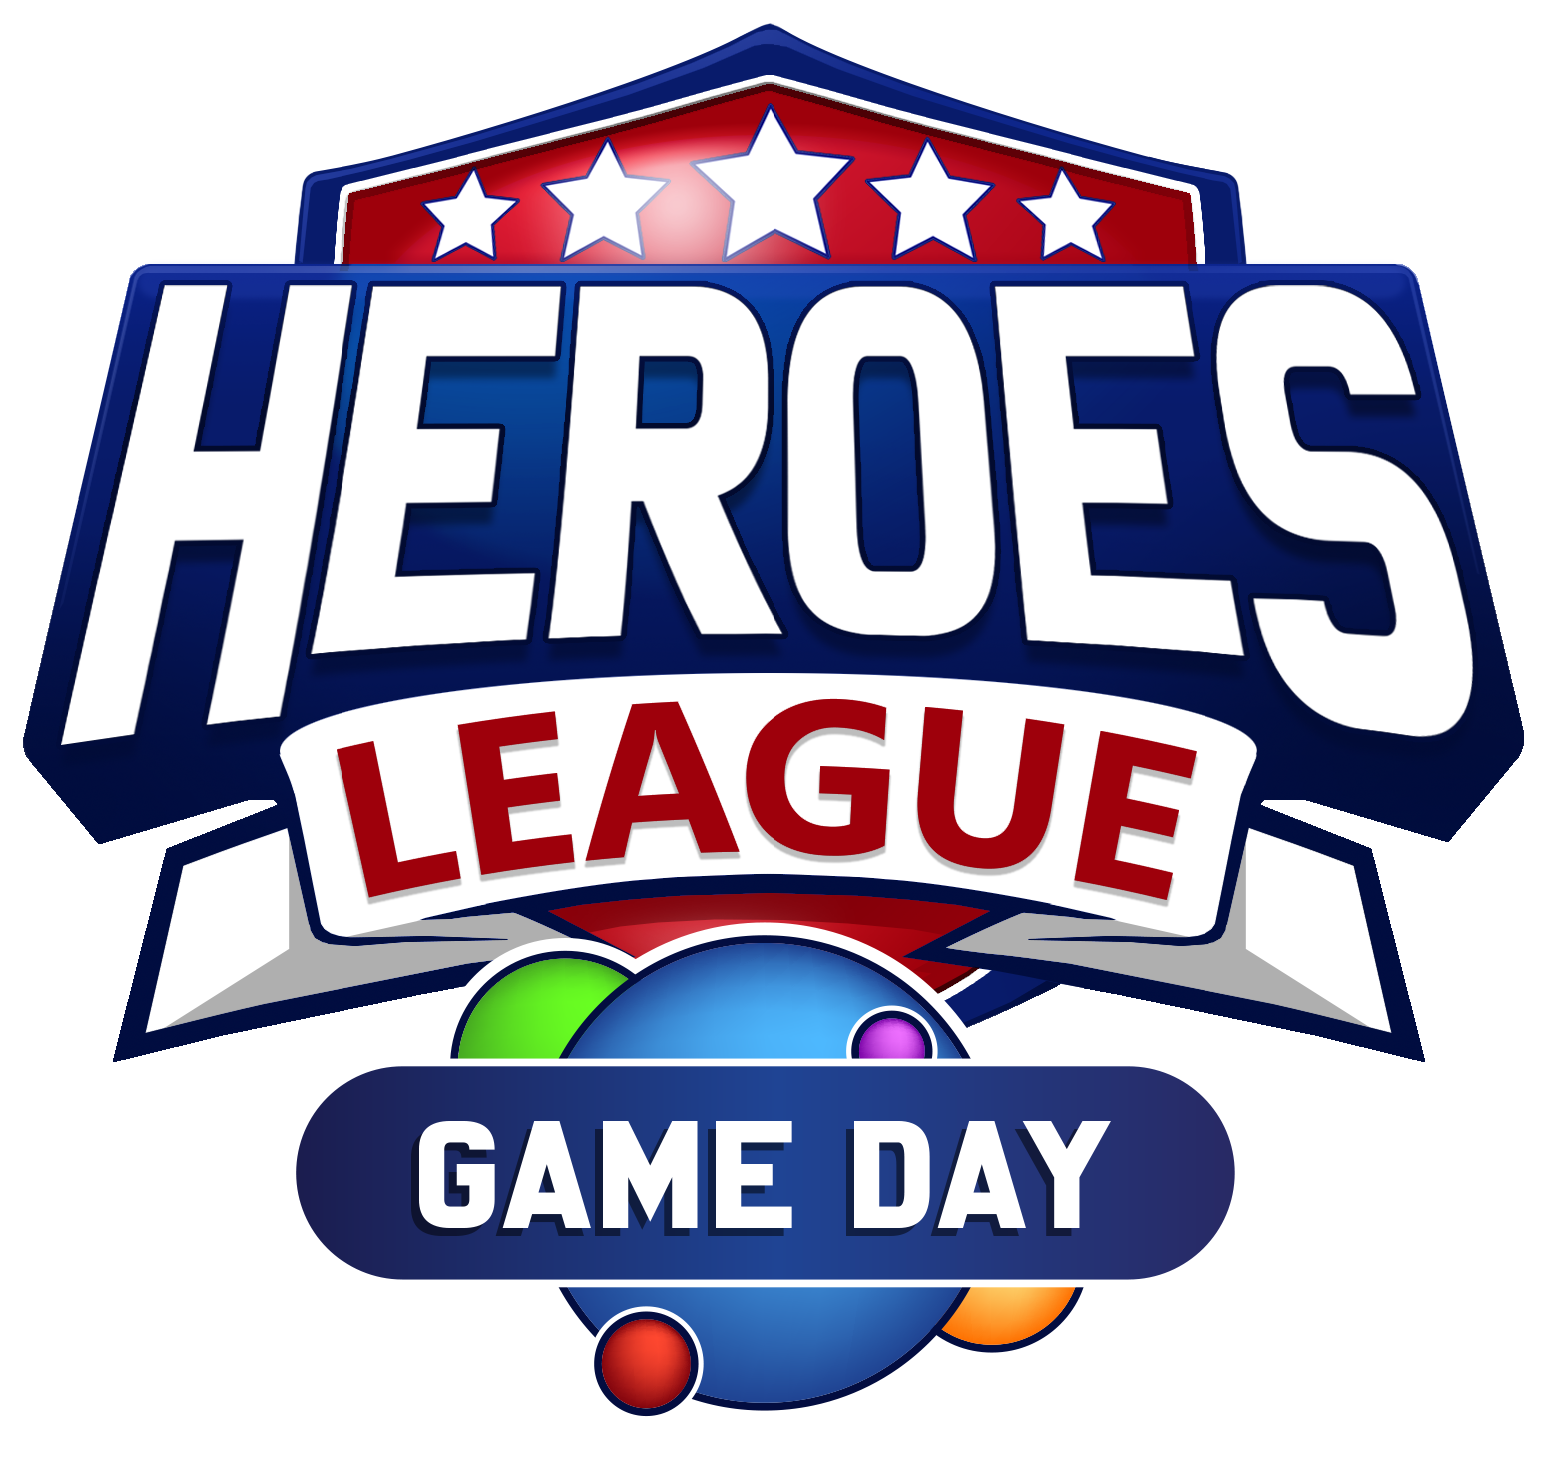 Heroes League Game Day logo